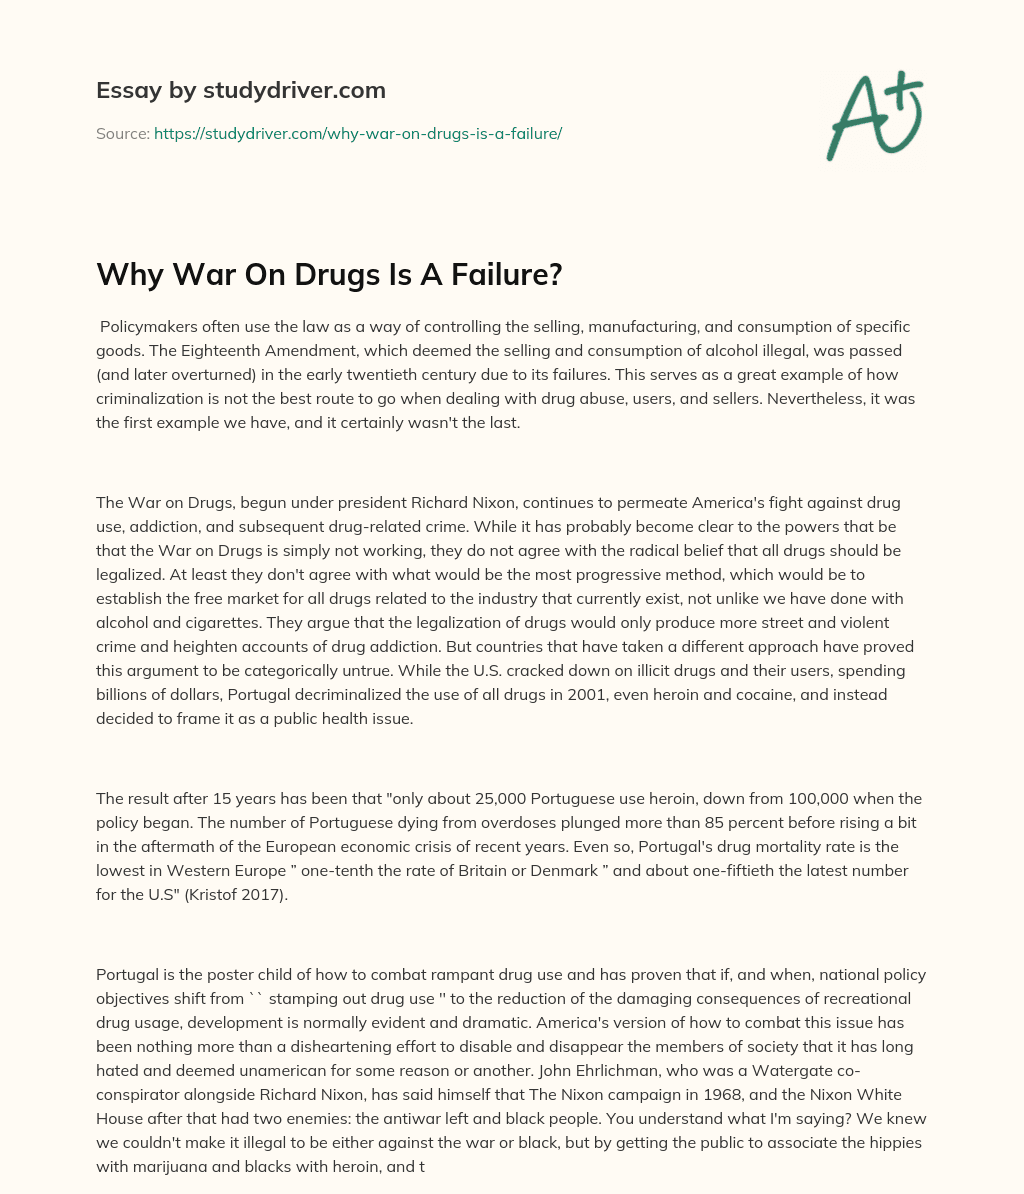 Why War on Drugs is a Failure? essay